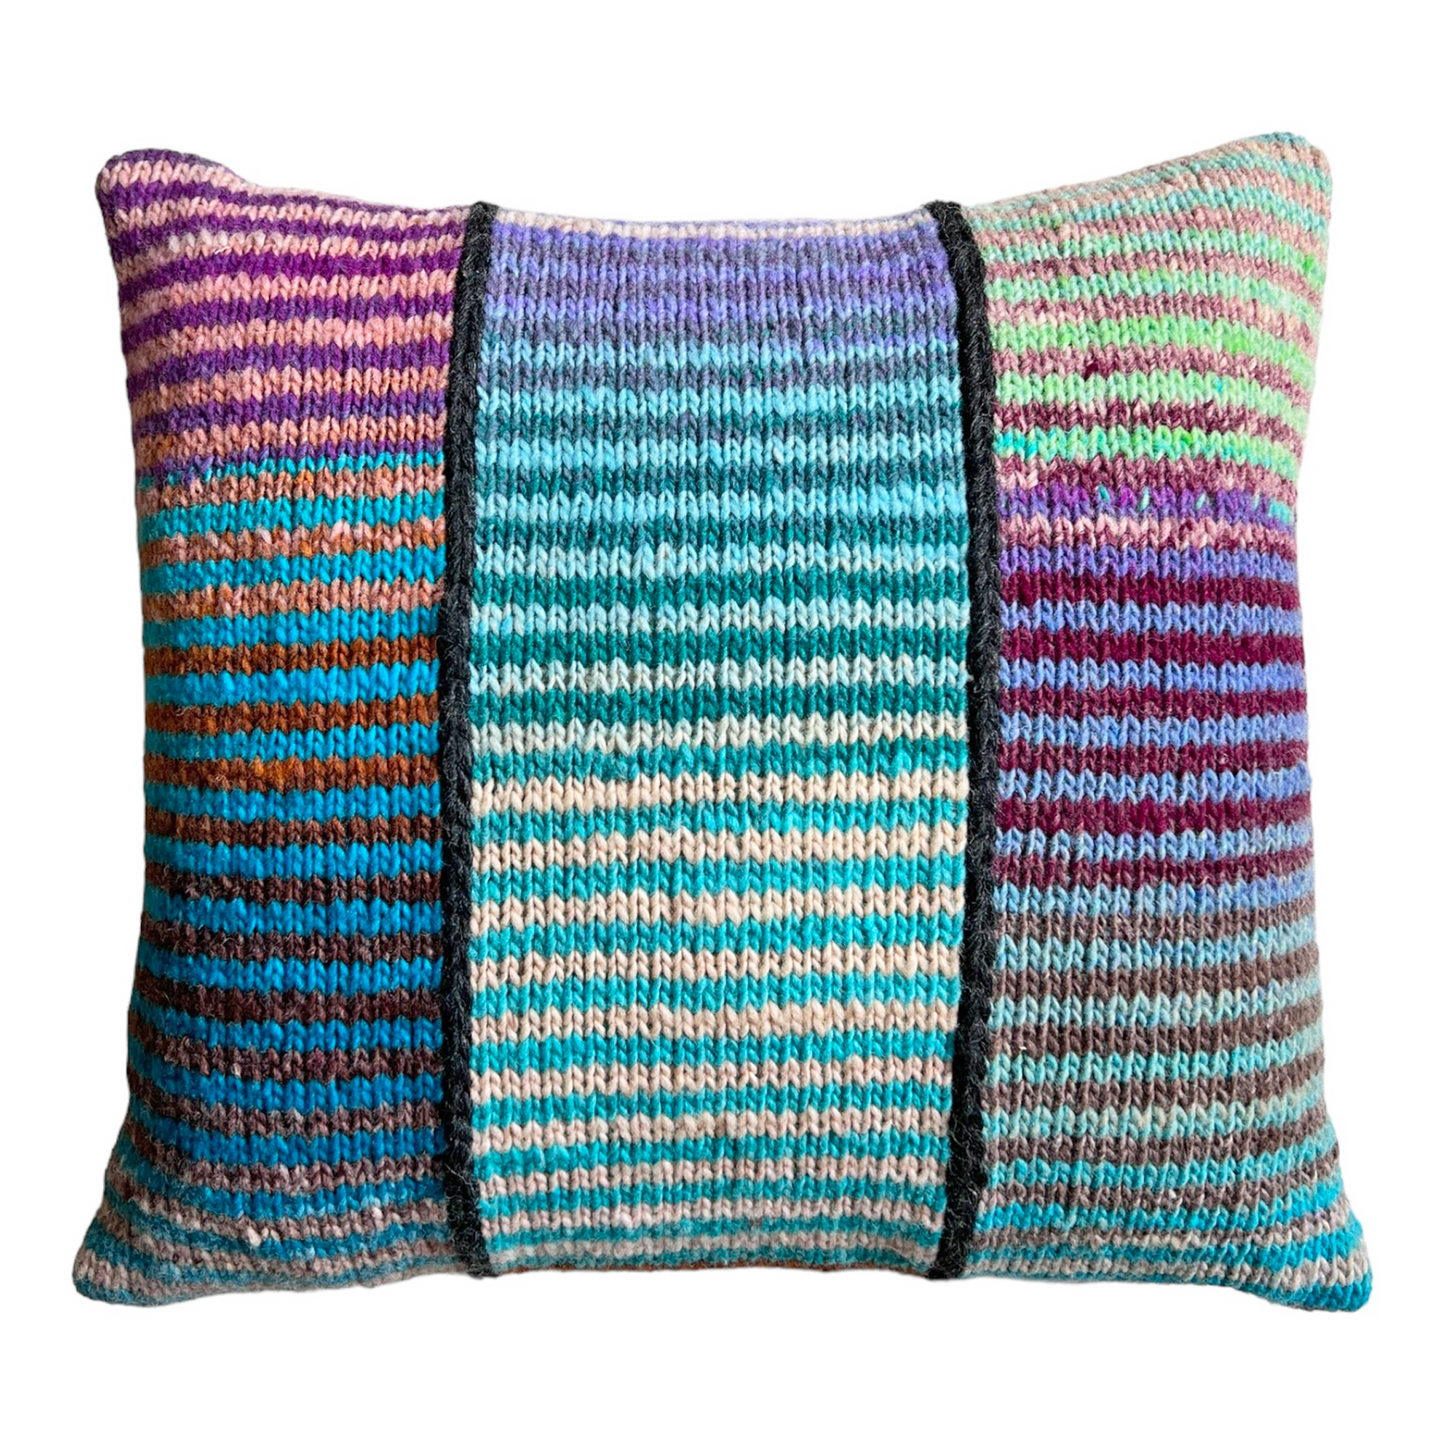 100% wool throw pillow, hand-knit in three vertical sections of alternating, variegated stripes in shades of blue, off-white, pink, and lavender.